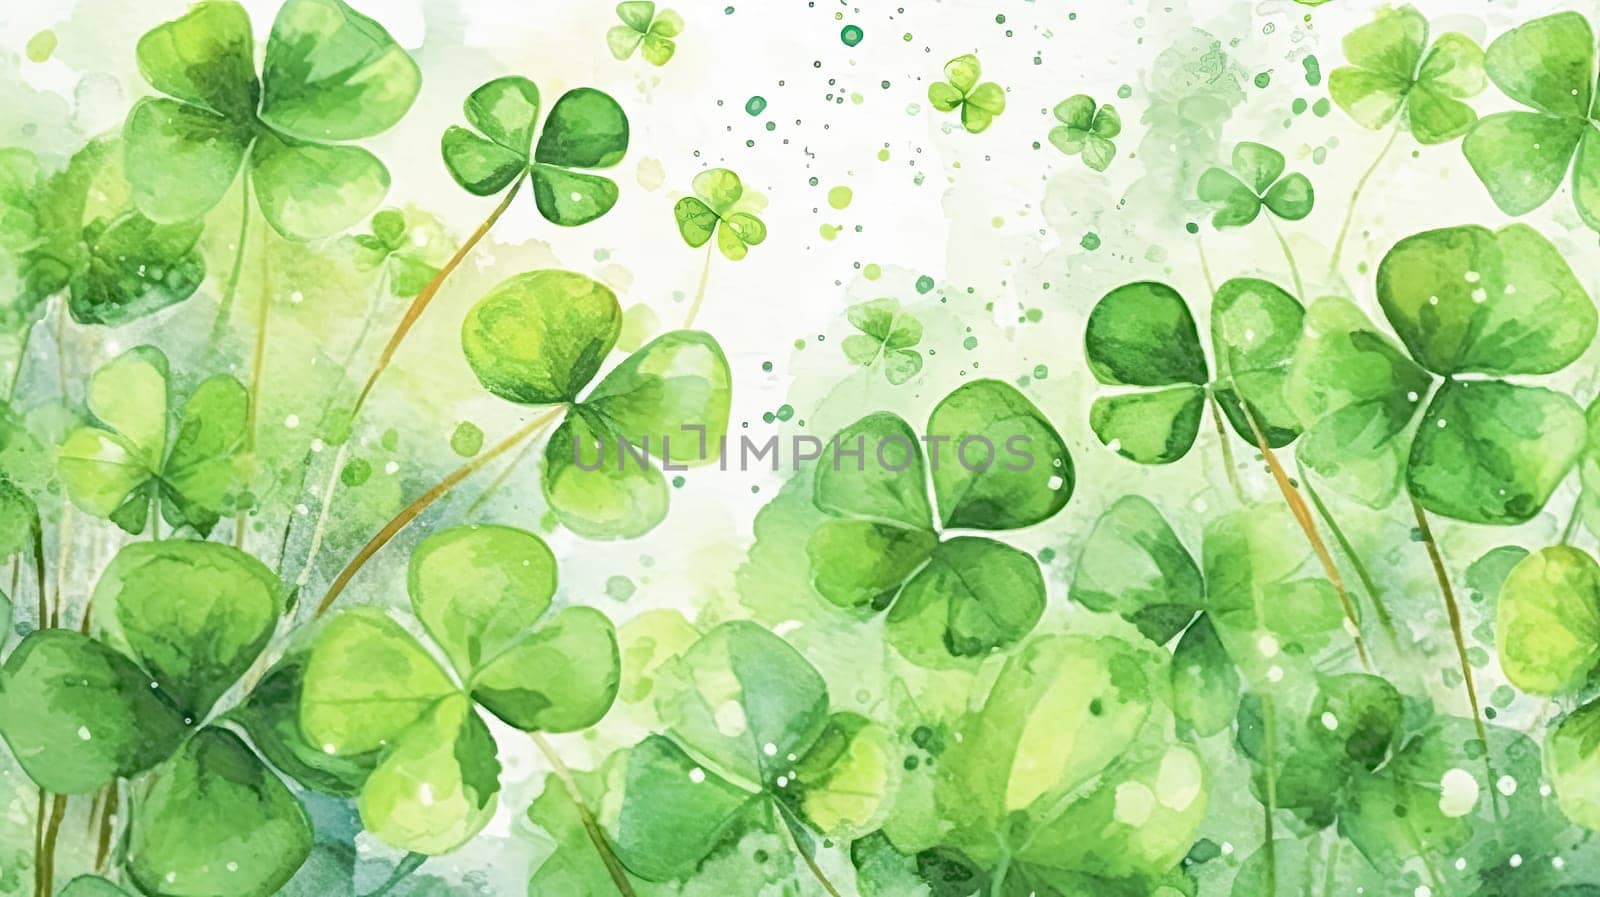 In the spirit of St. Patricks Day, a watercolor image showcases the delicate beauty of the clover, a cherished emblem of good luck and Irish tradition